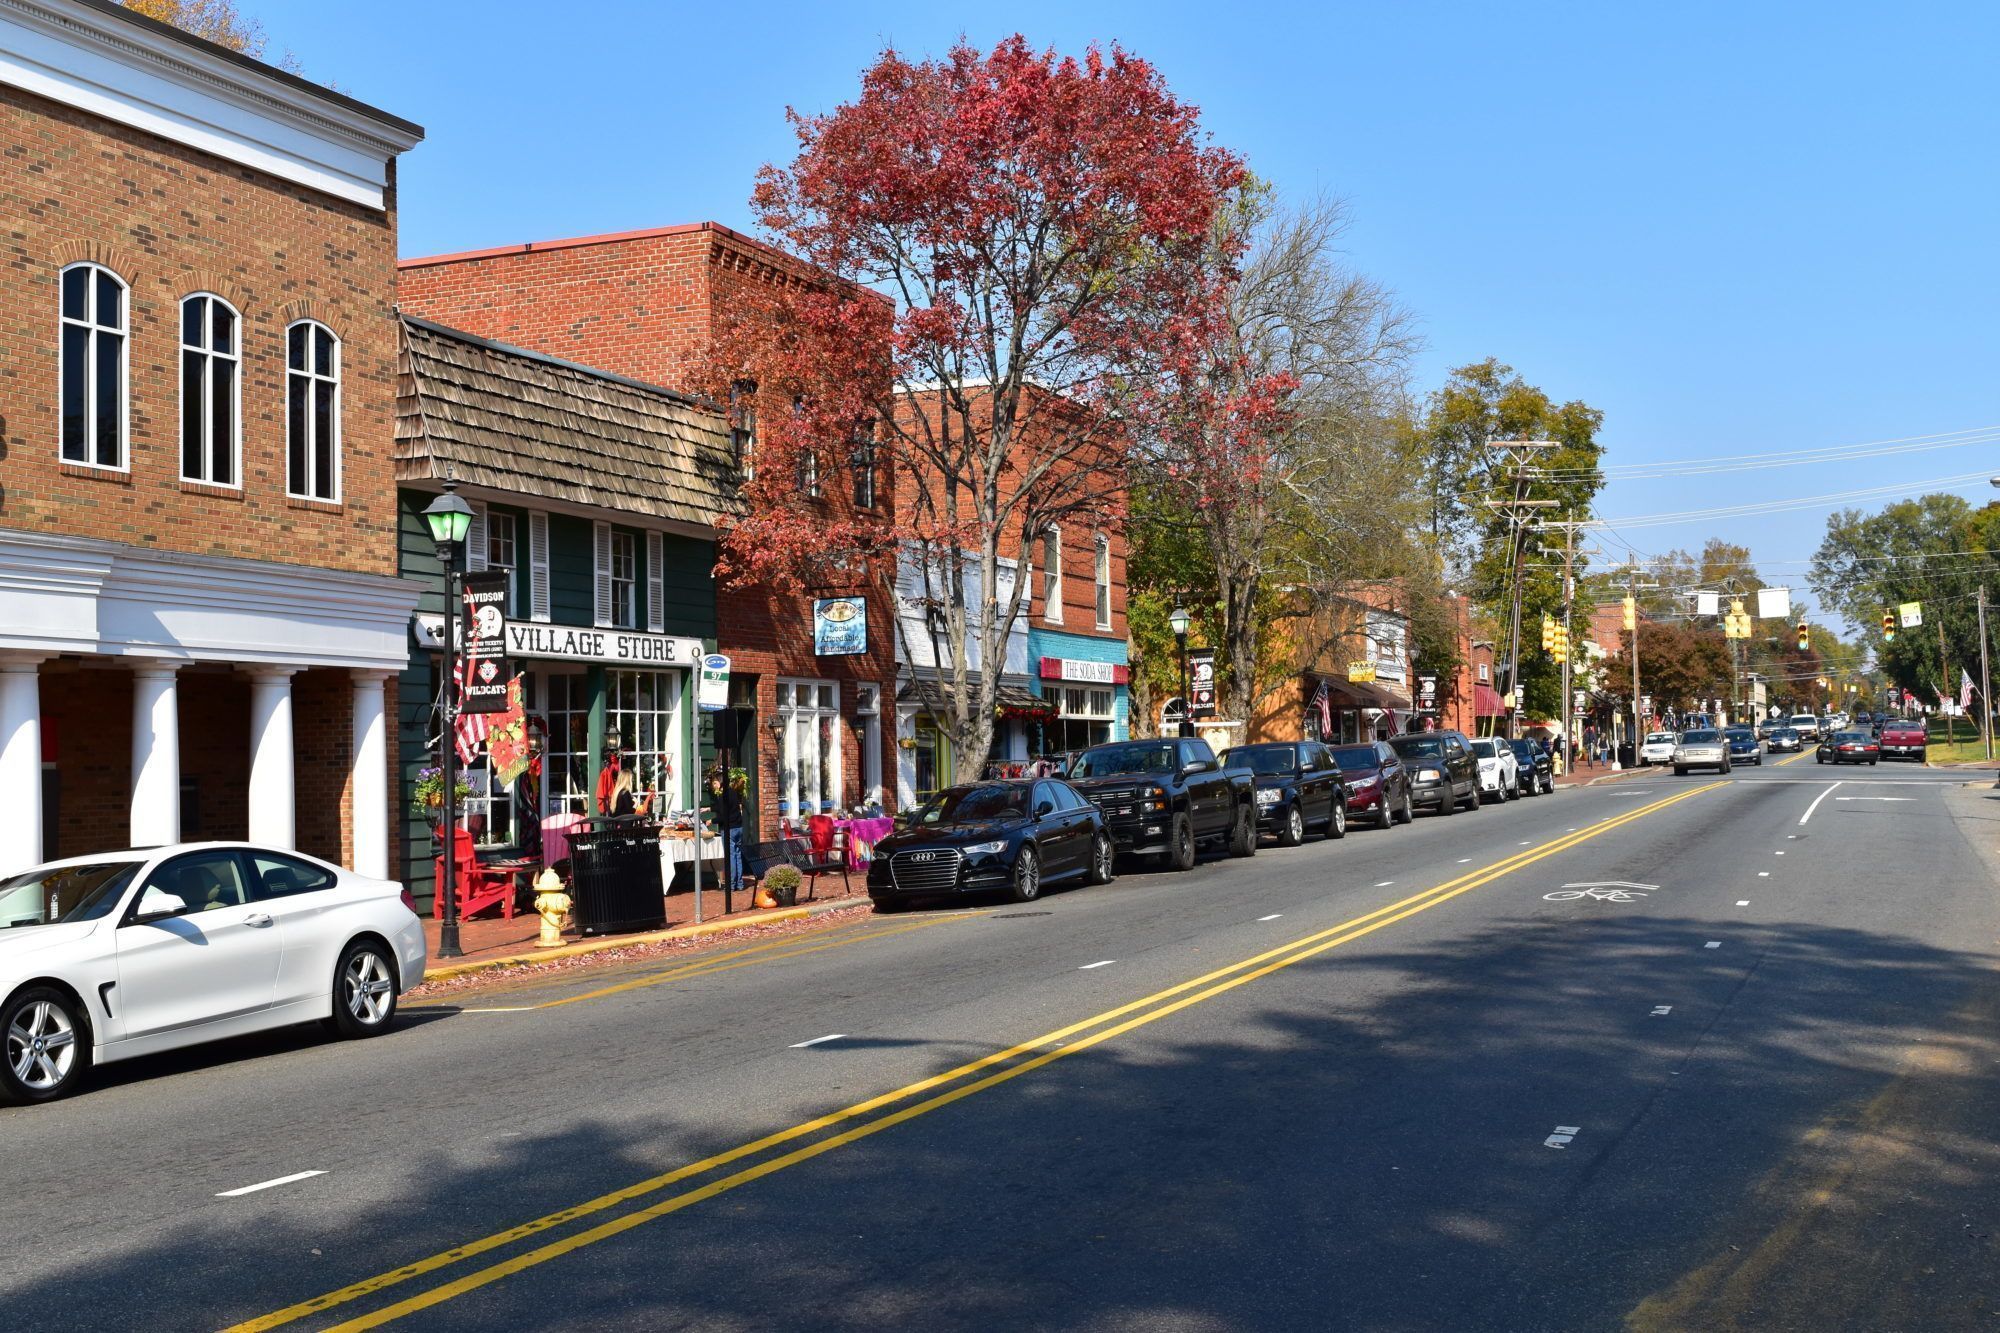 View of Main Street in Davidson, NC